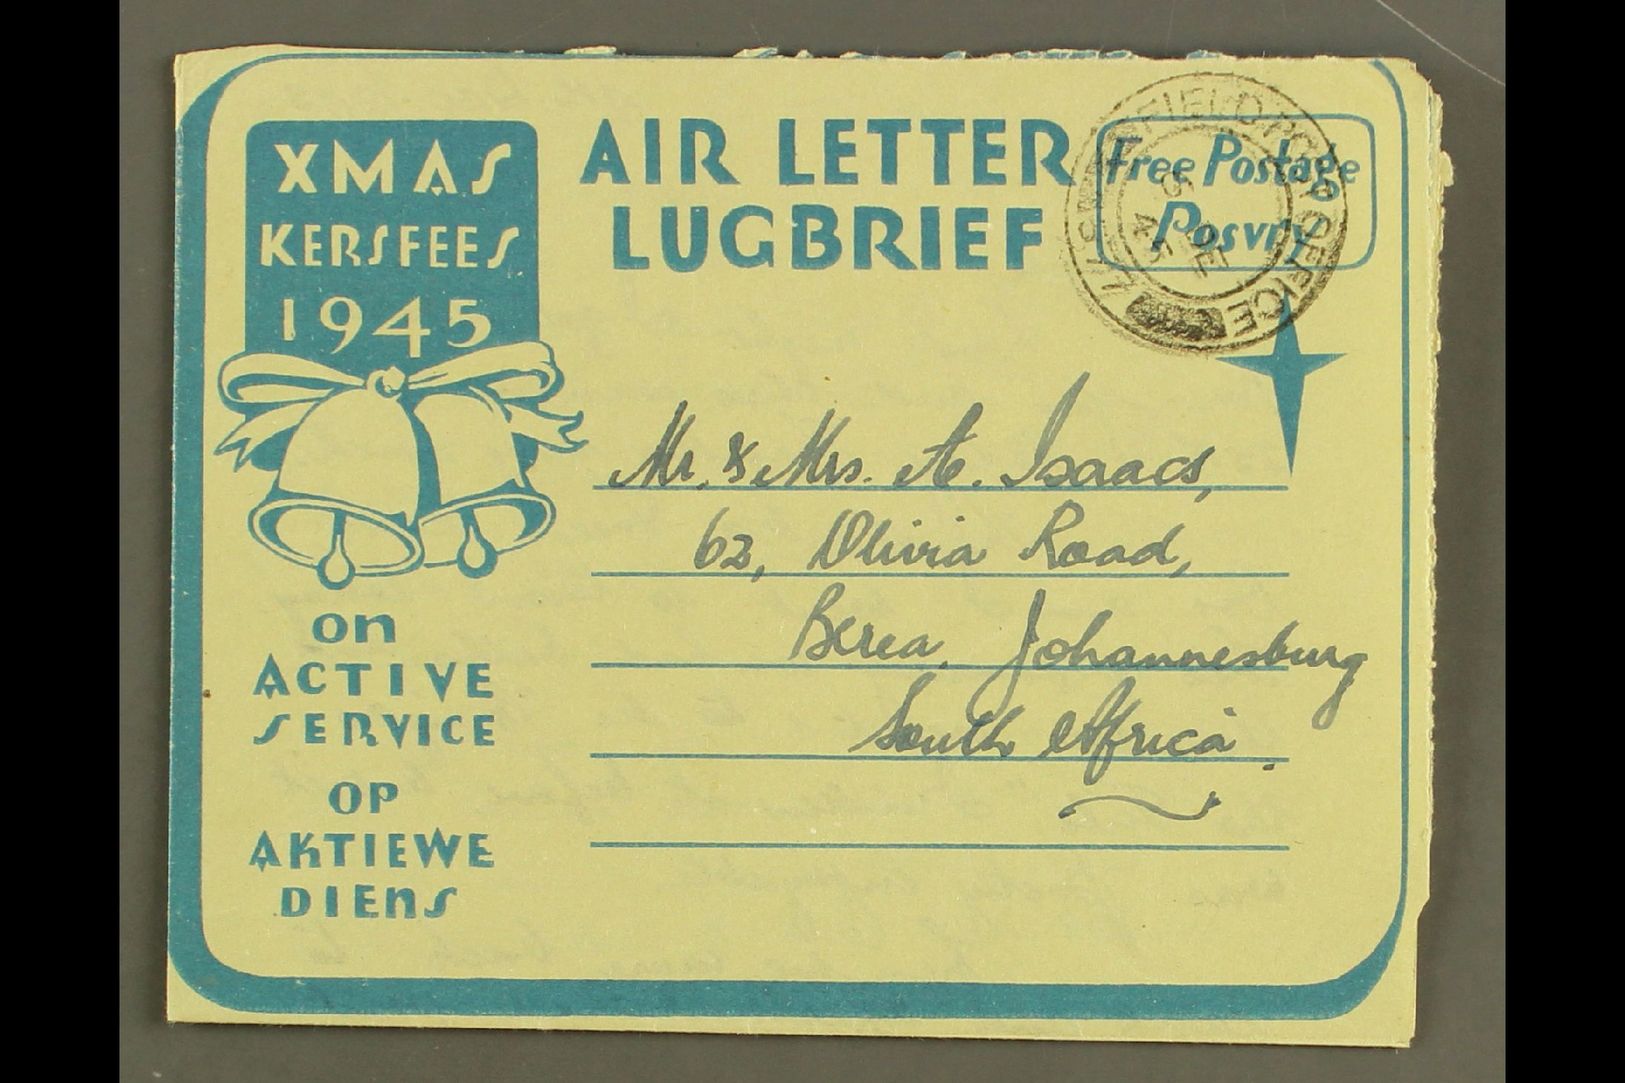 AEROGRAMME  1945 "Greetings From The North" Christmas Air Letter, Inscribed "Free Postage" For Serving Troops, 1979 Unio - Non Classés